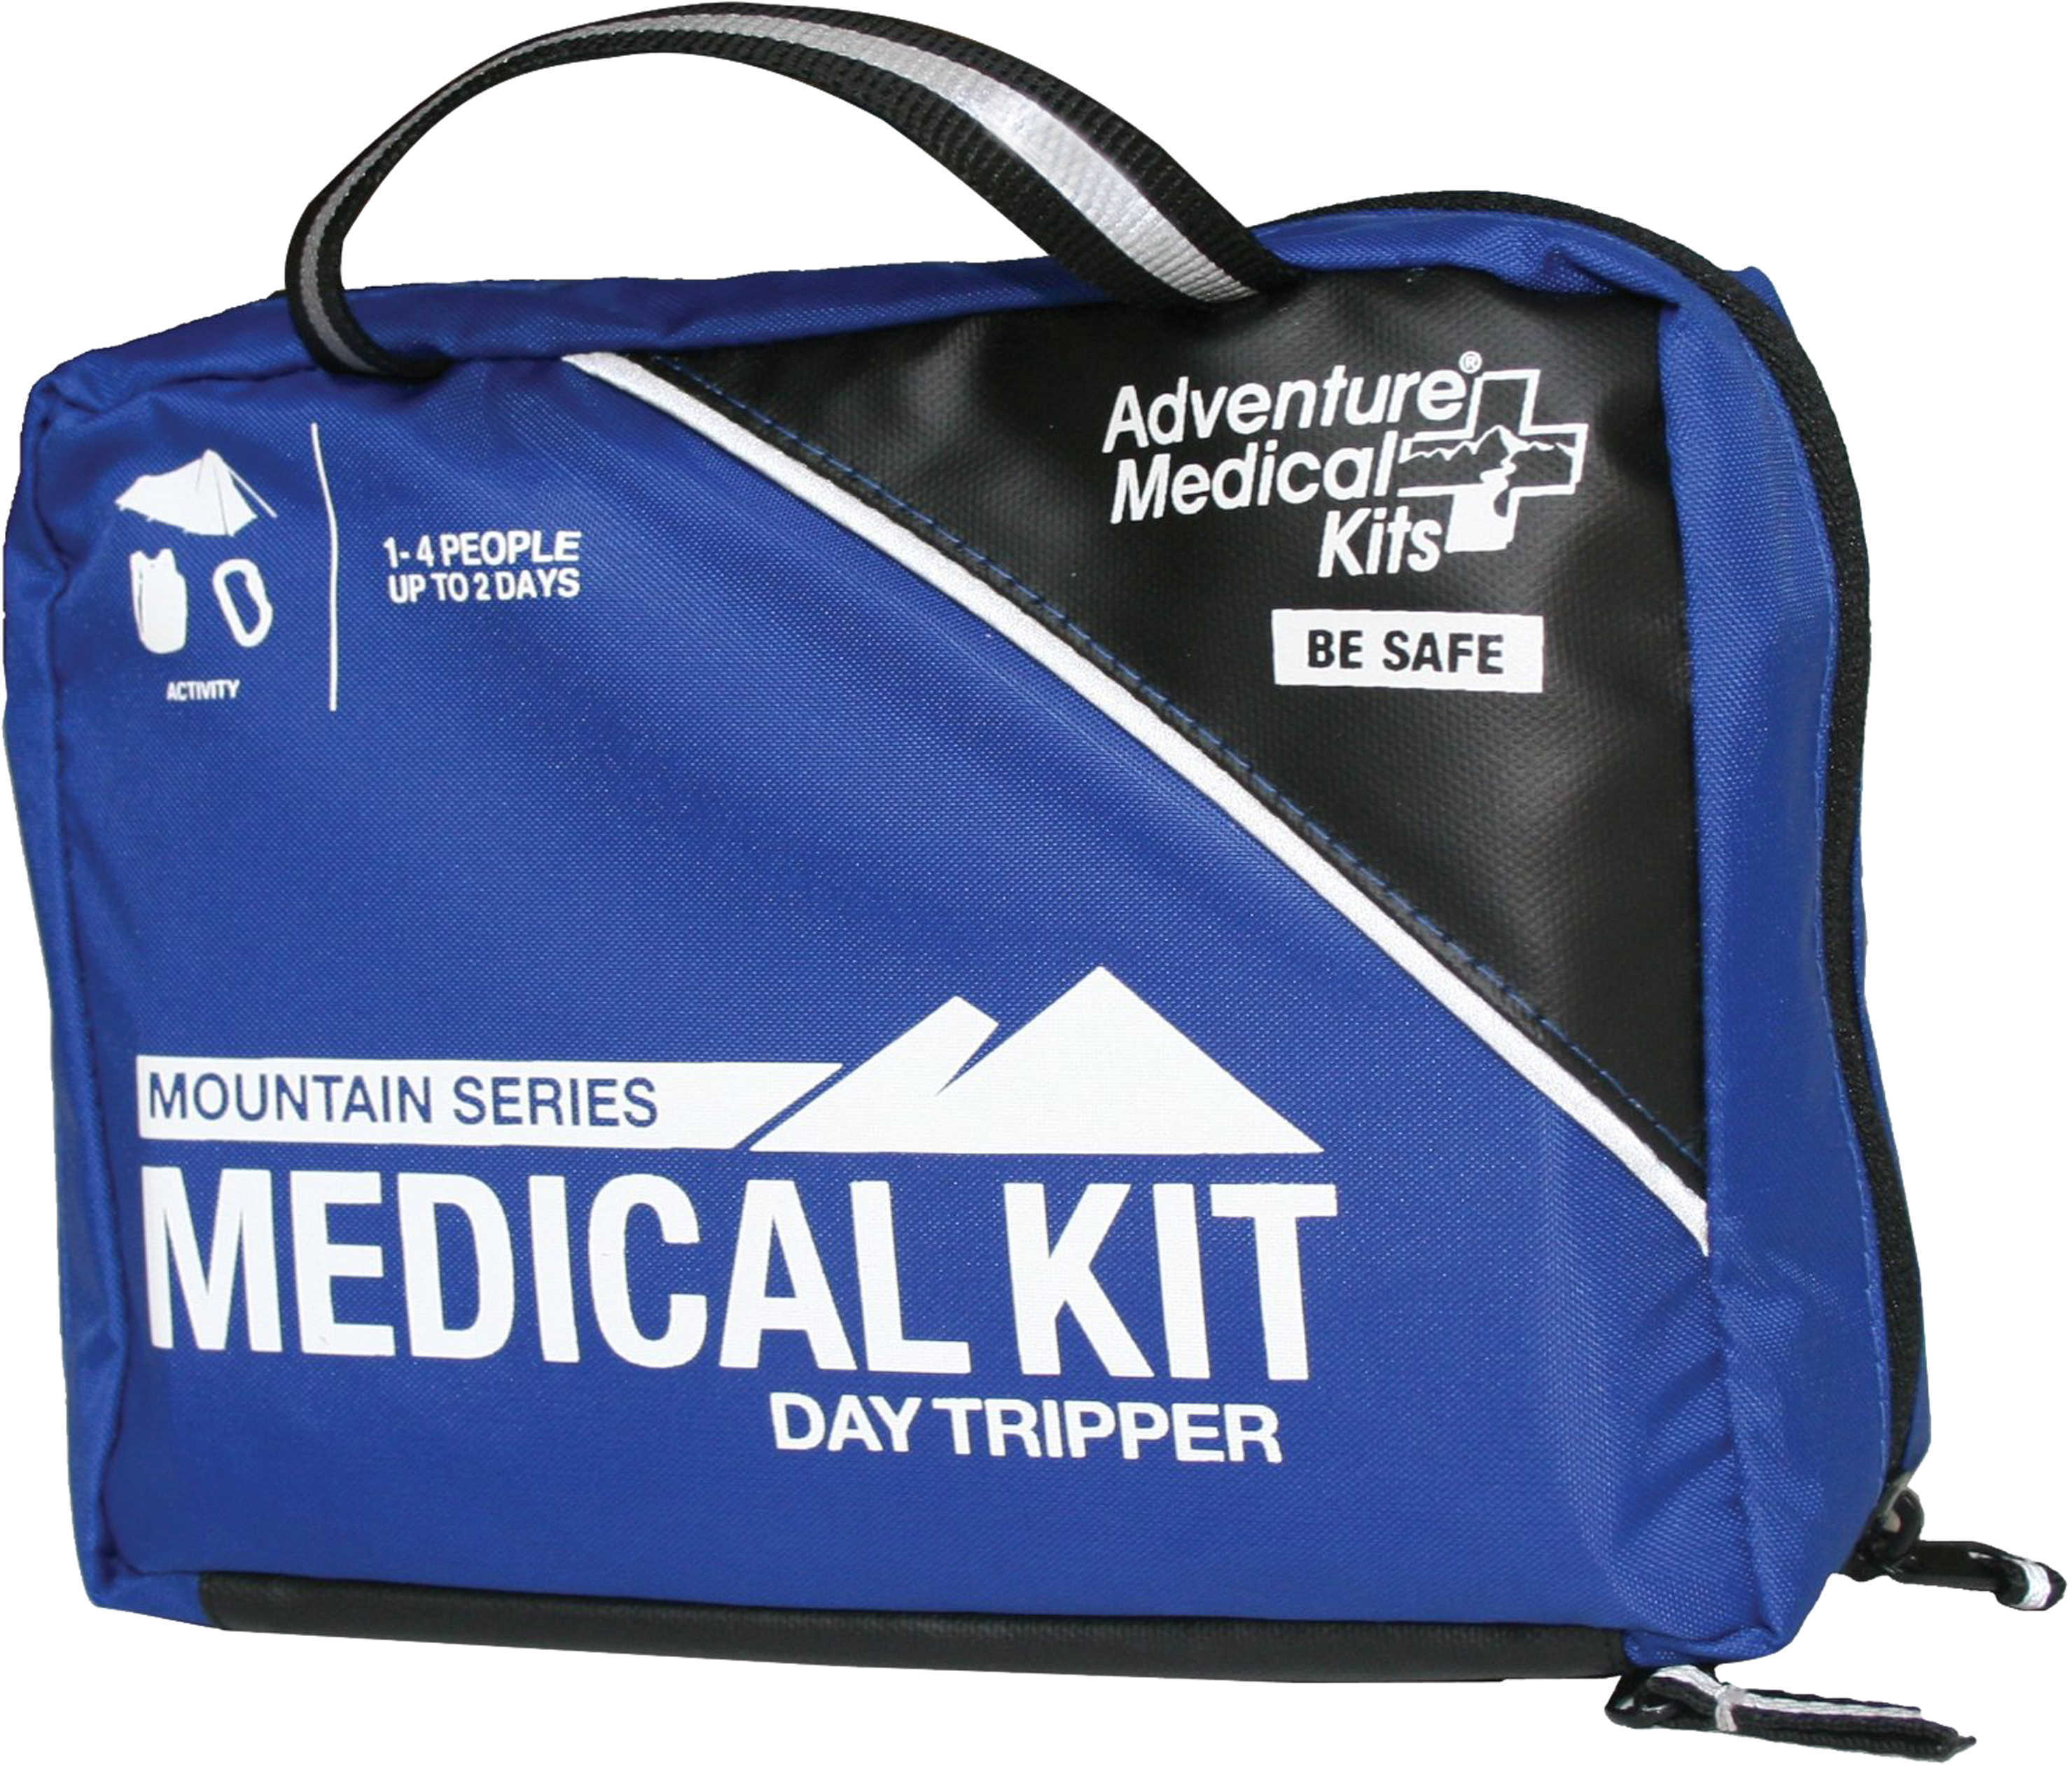 Adventure Medical Kits / Tender Corp Mountain Series Daytripper 2010 Edition 0100-0116